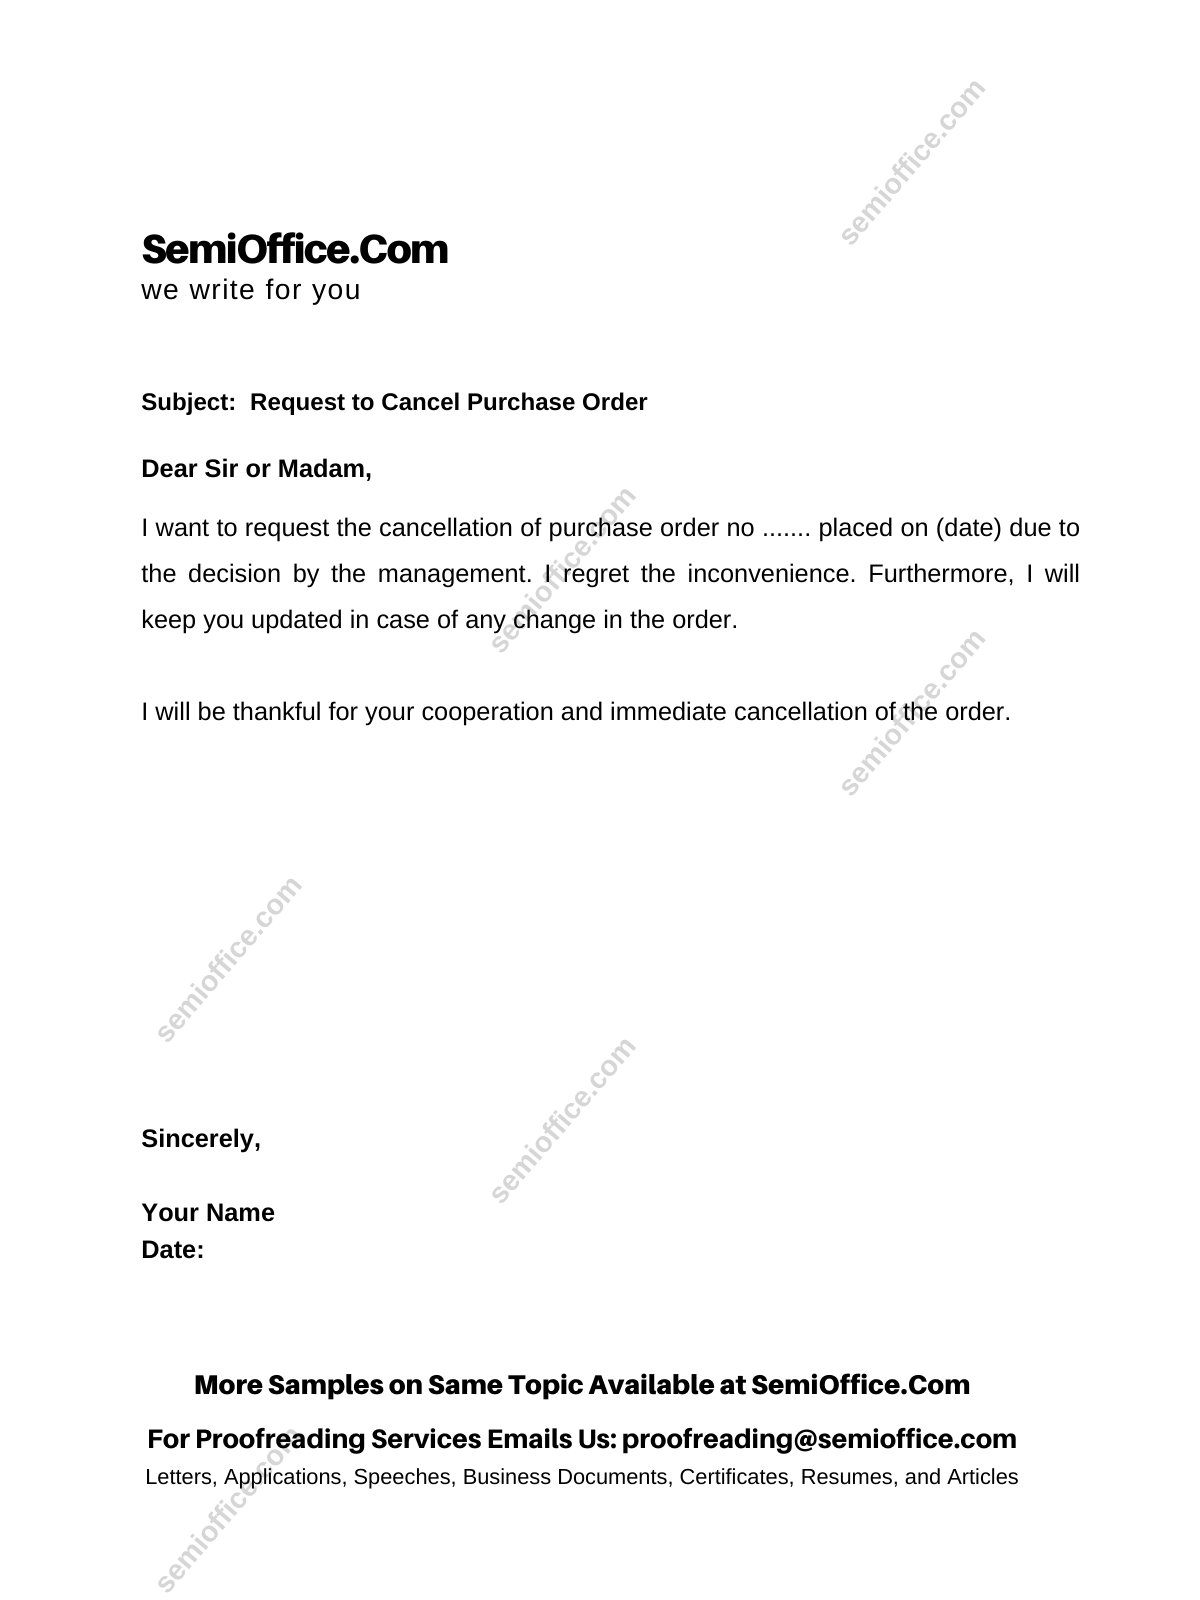 Sample Letter To Cancel Purchase Order 5518